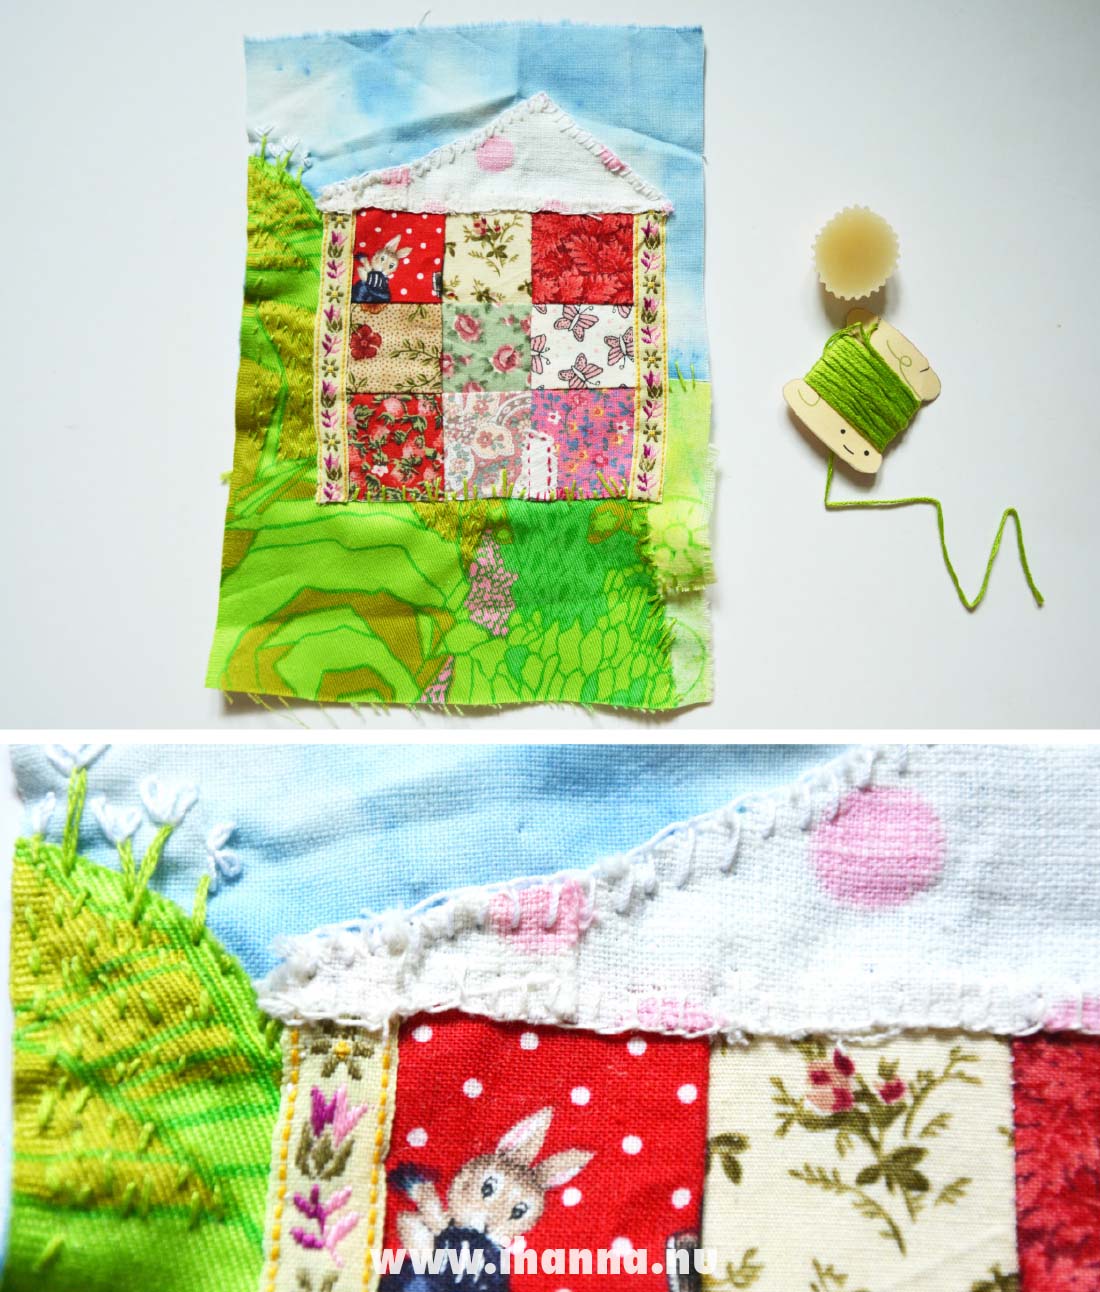 Textile book page with the theme old quilt & country cottage, made by iHanna